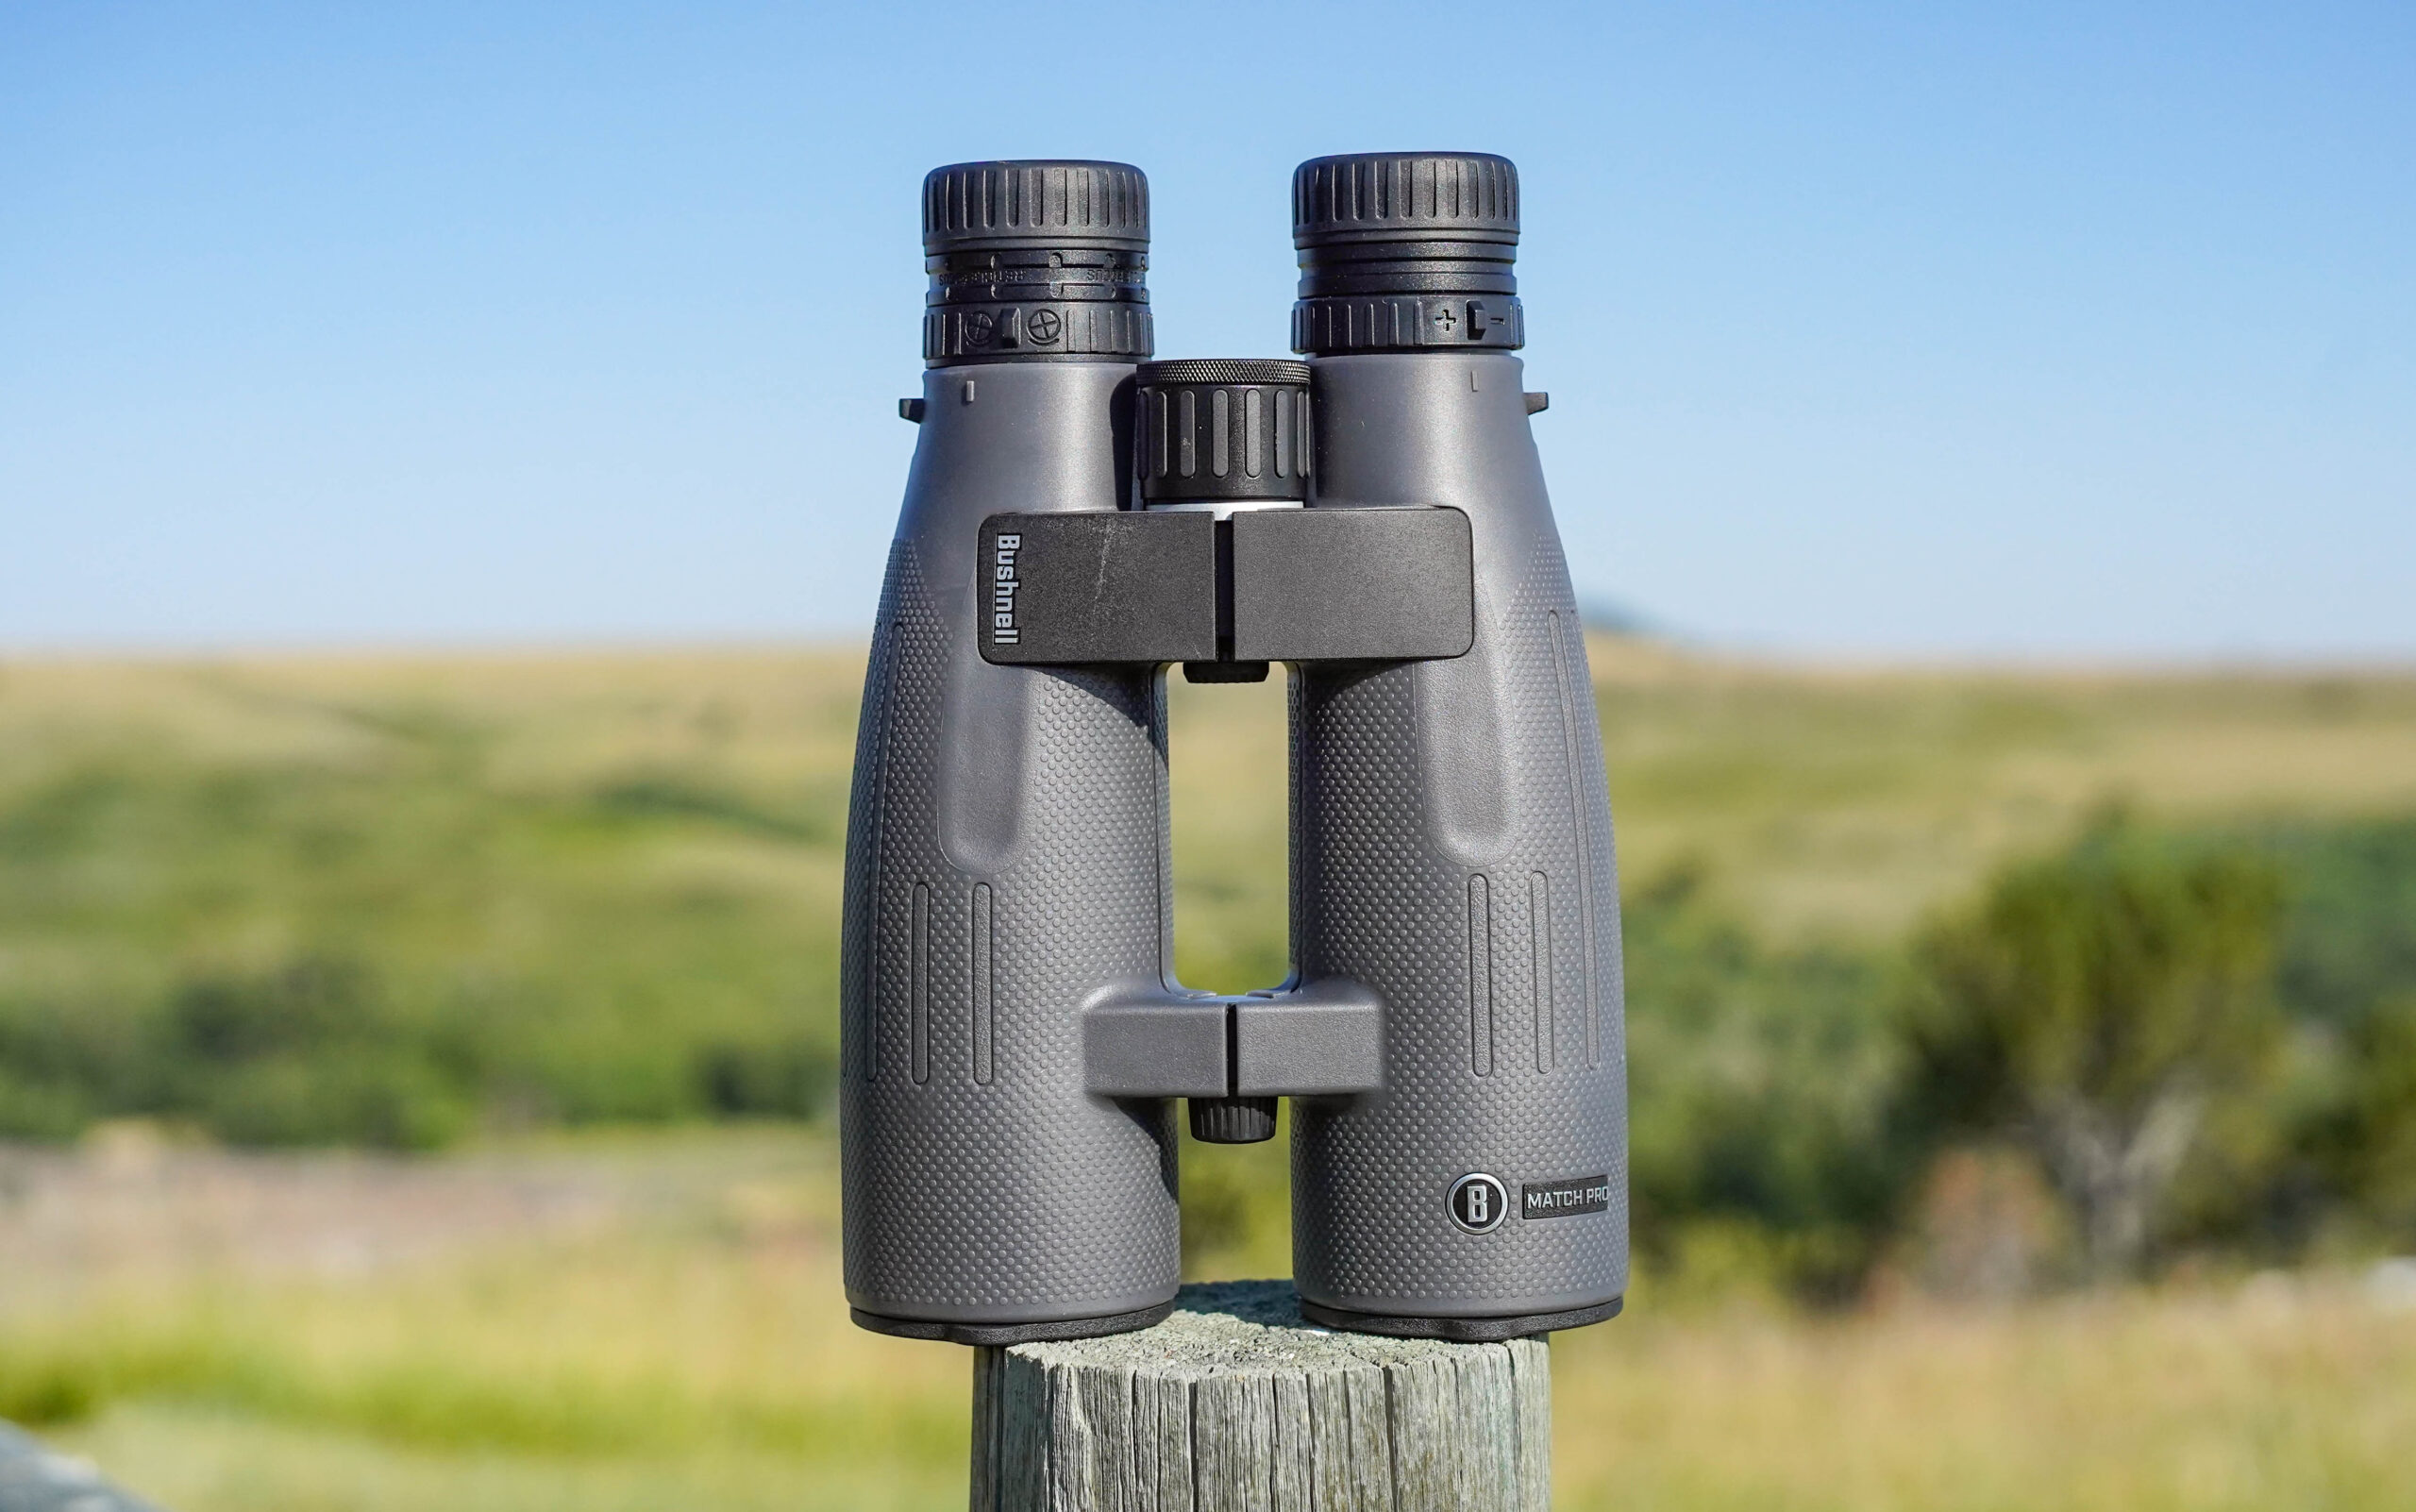 The Busnell Match Pro binoculars have a rangefinding reticle.